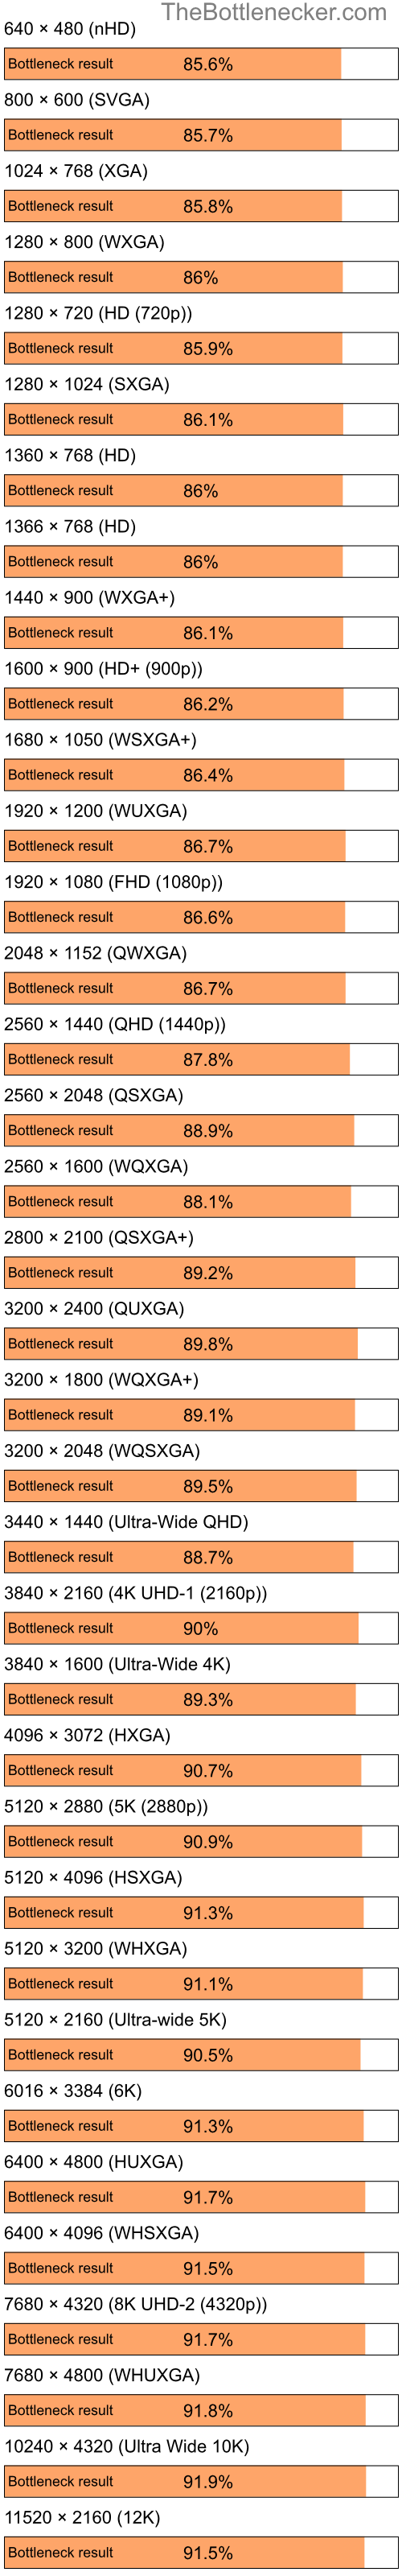 Bottleneck results by resolution for Intel Celeron M 410 and NVIDIA GeForce FX Go 5600 in Graphic Card Intense Tasks